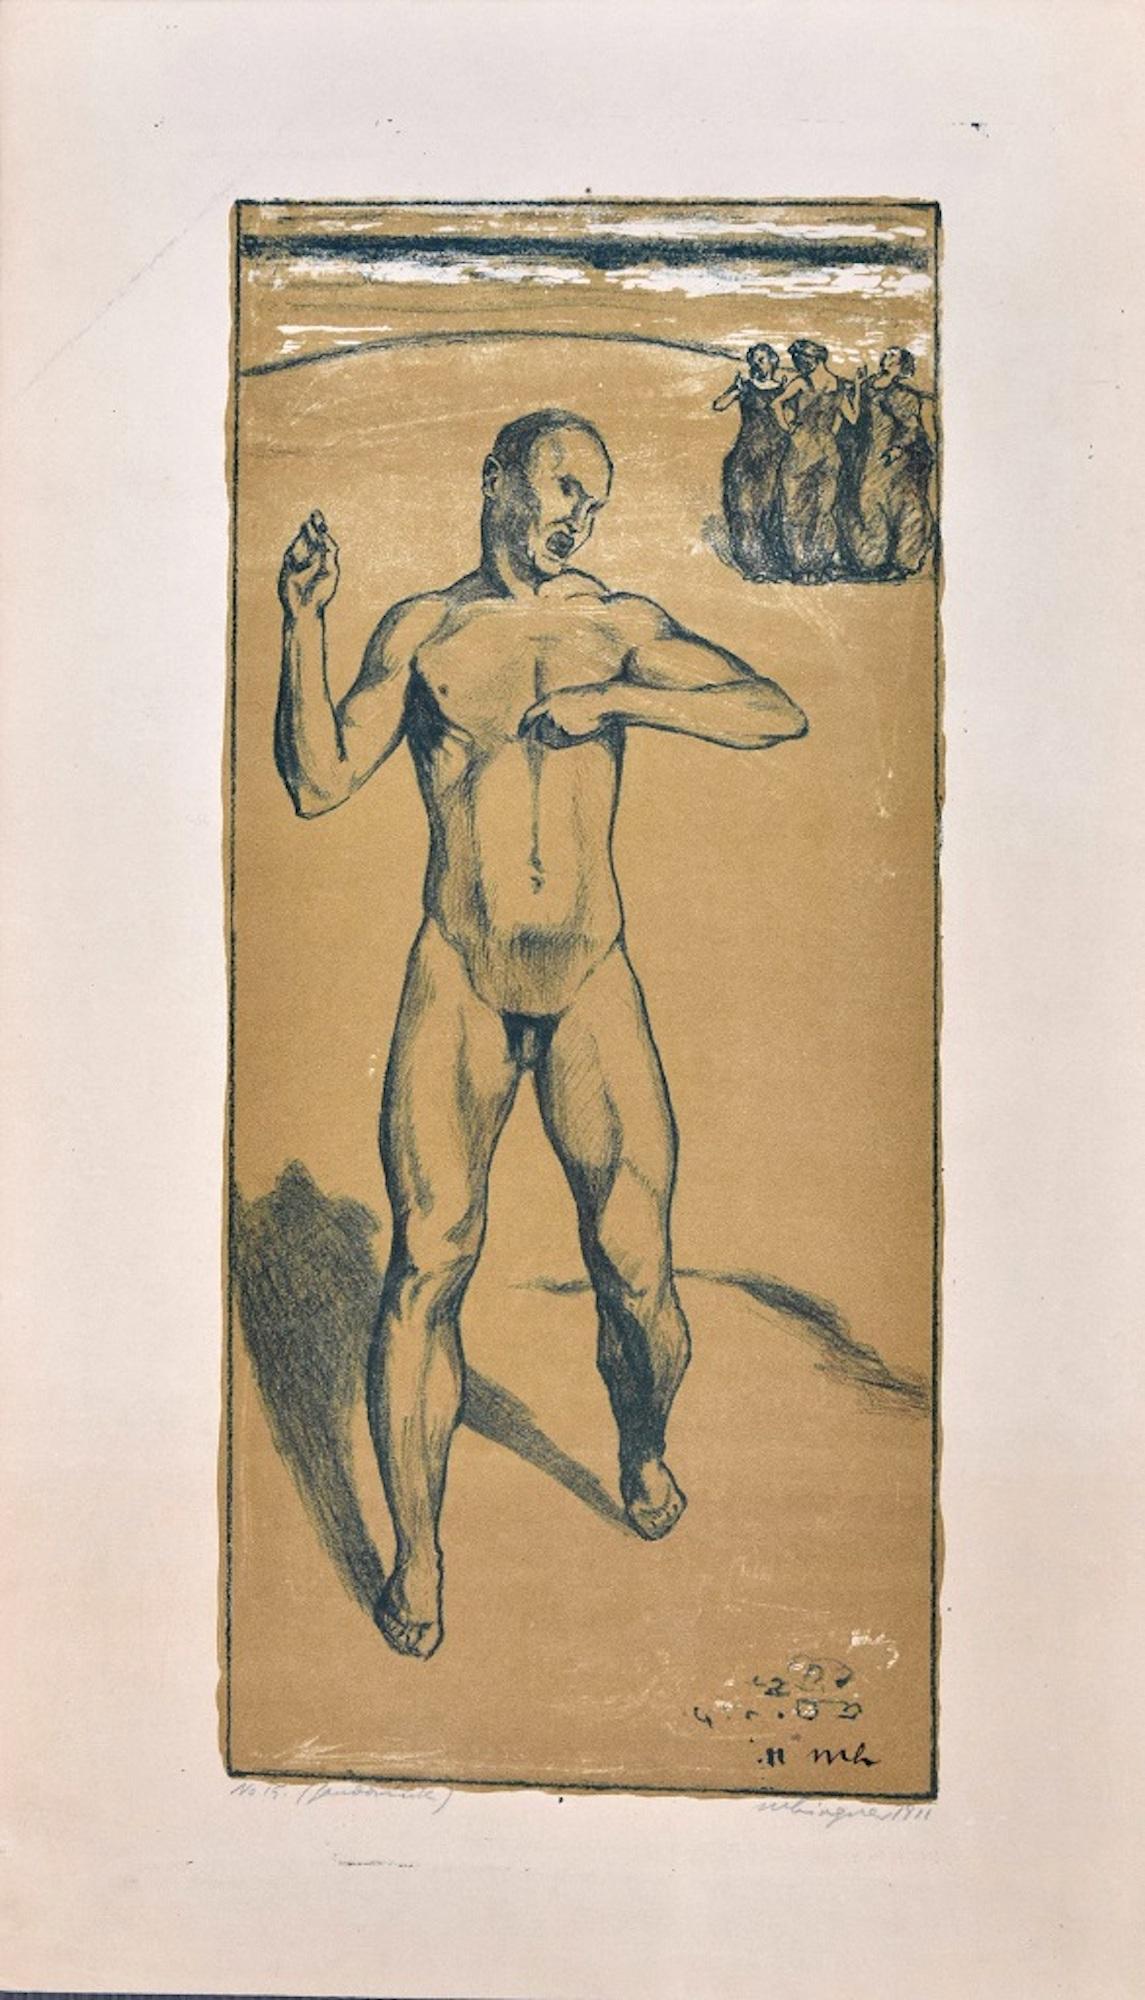 Nude of a Man - Original Hand Colored Lithograph by Max Lingner